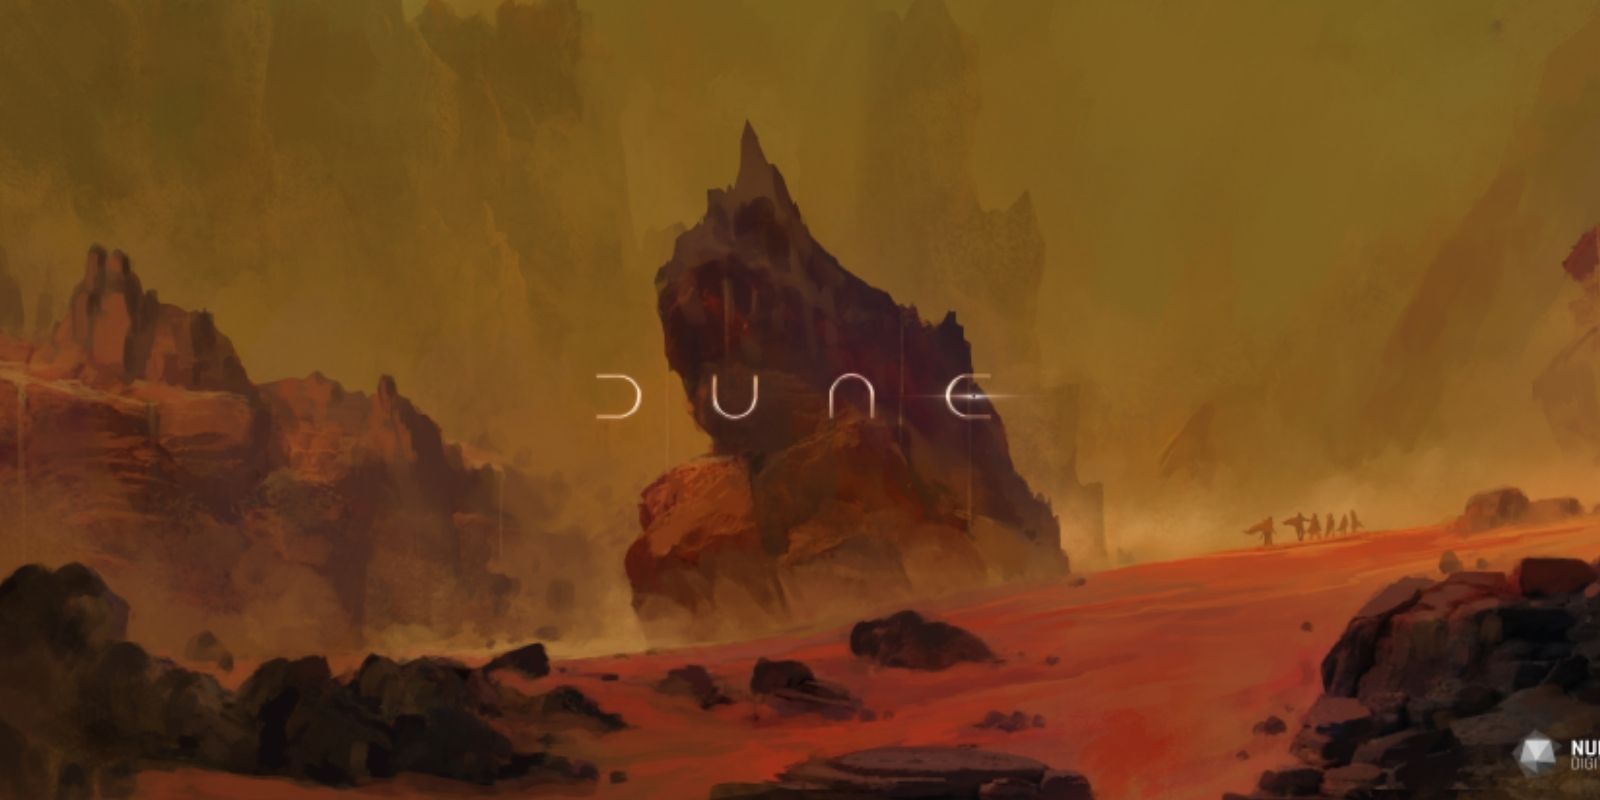 Concept art for the upcoming Dune multiplayer game